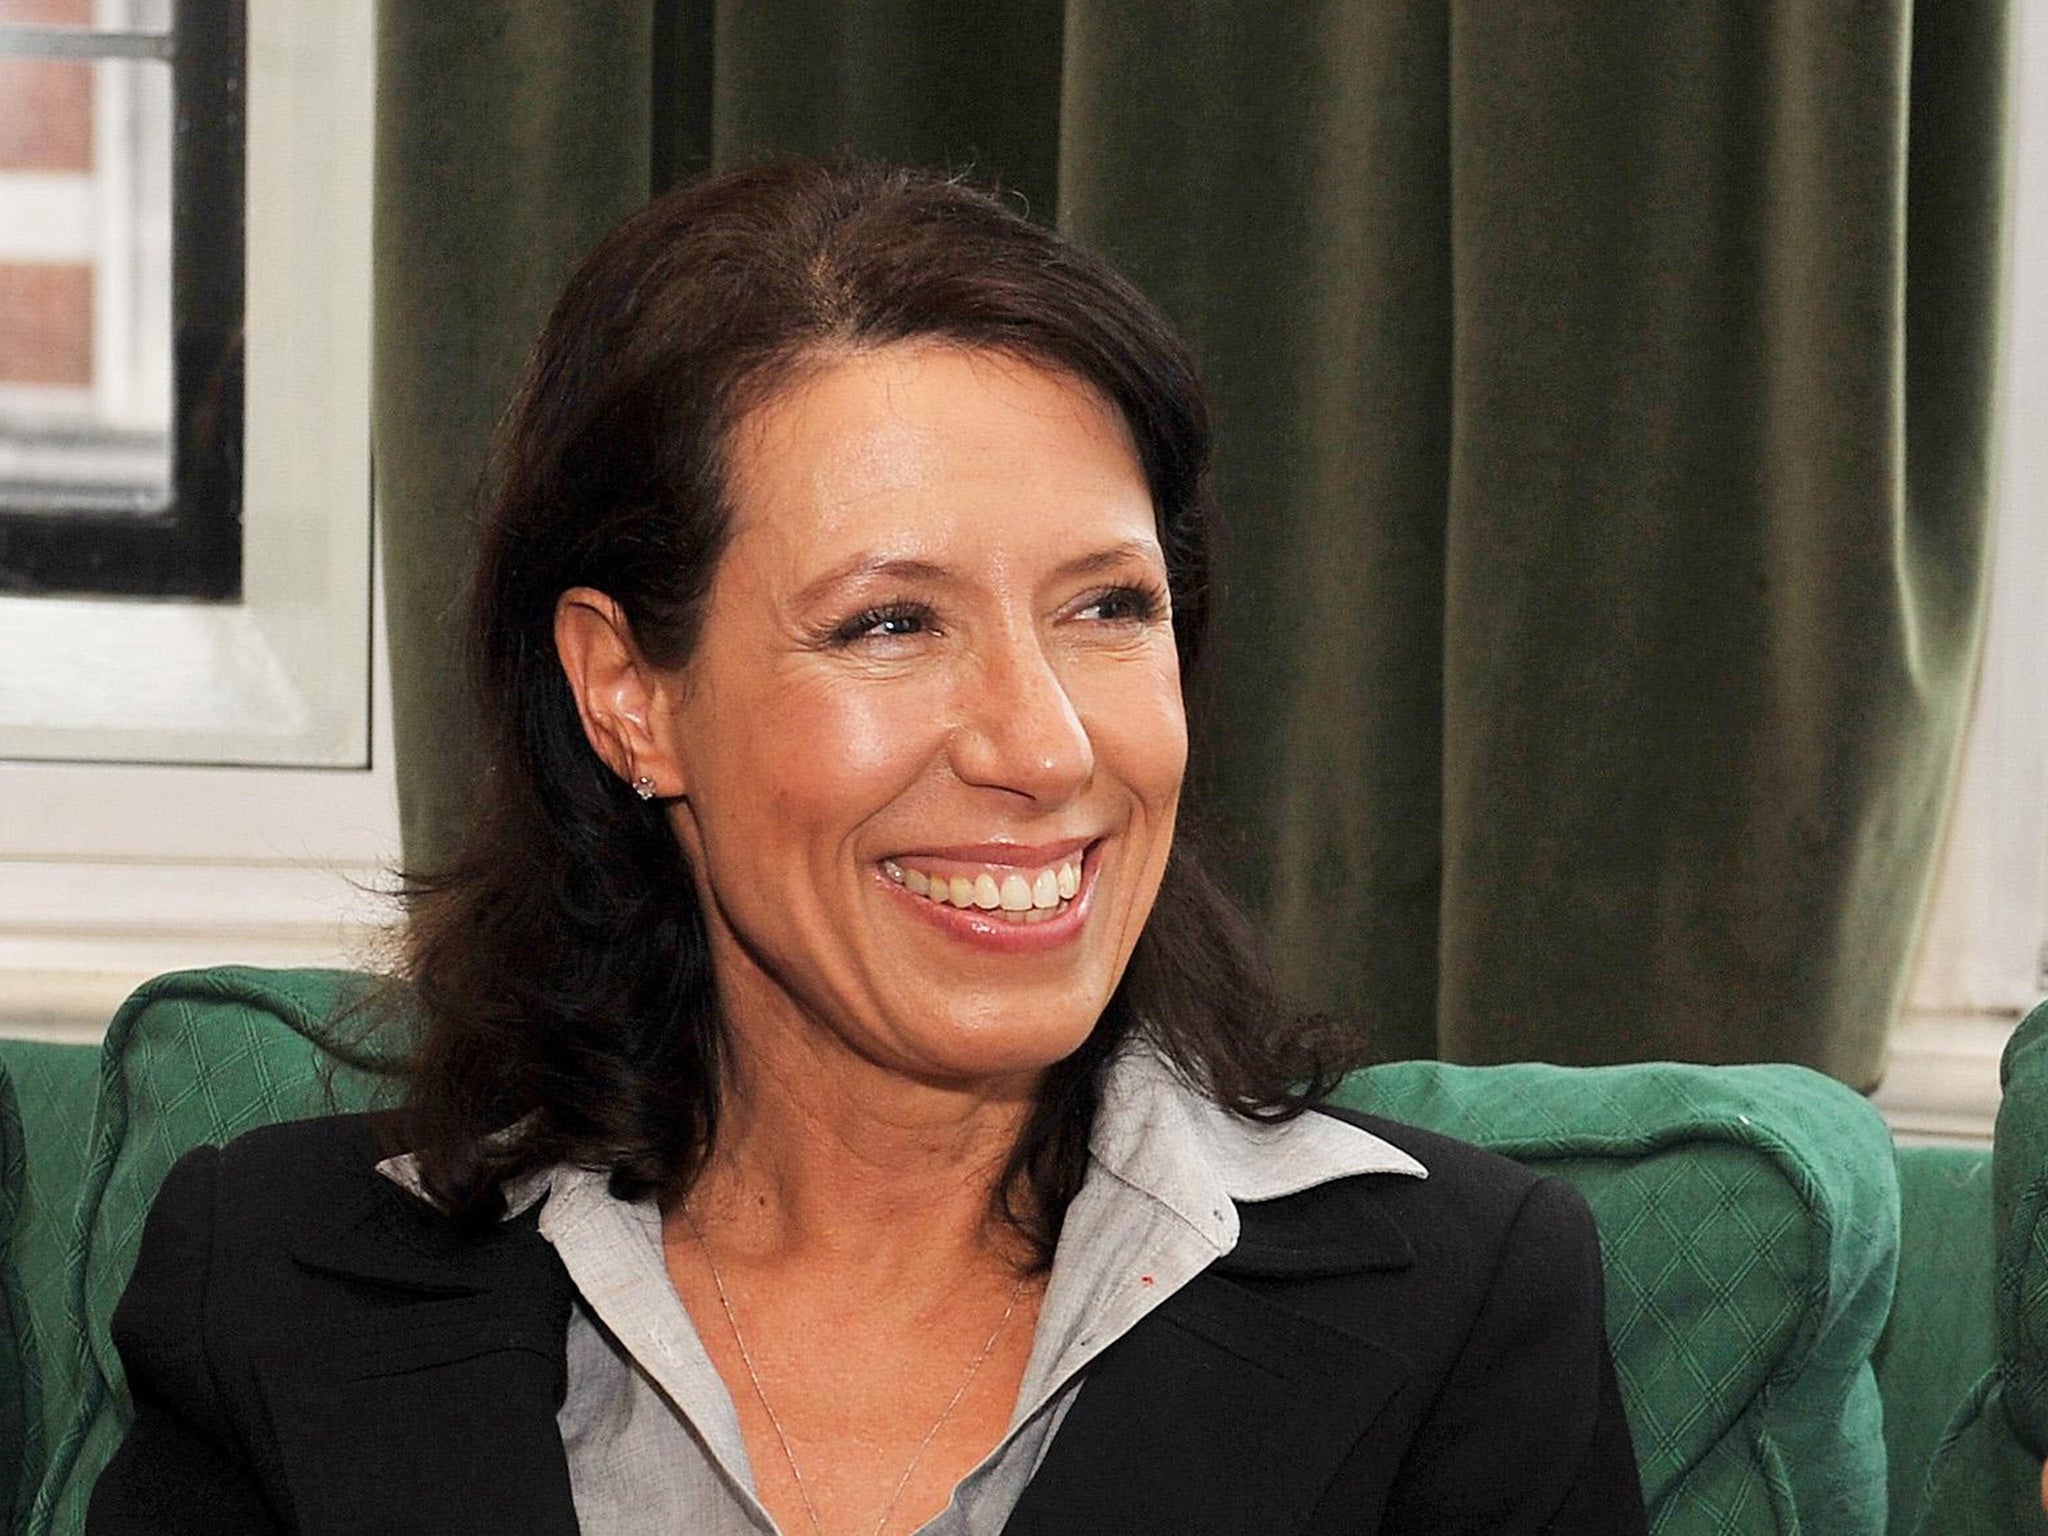 Debbie Abrahams said that cuts were having an impact on the poorest in society